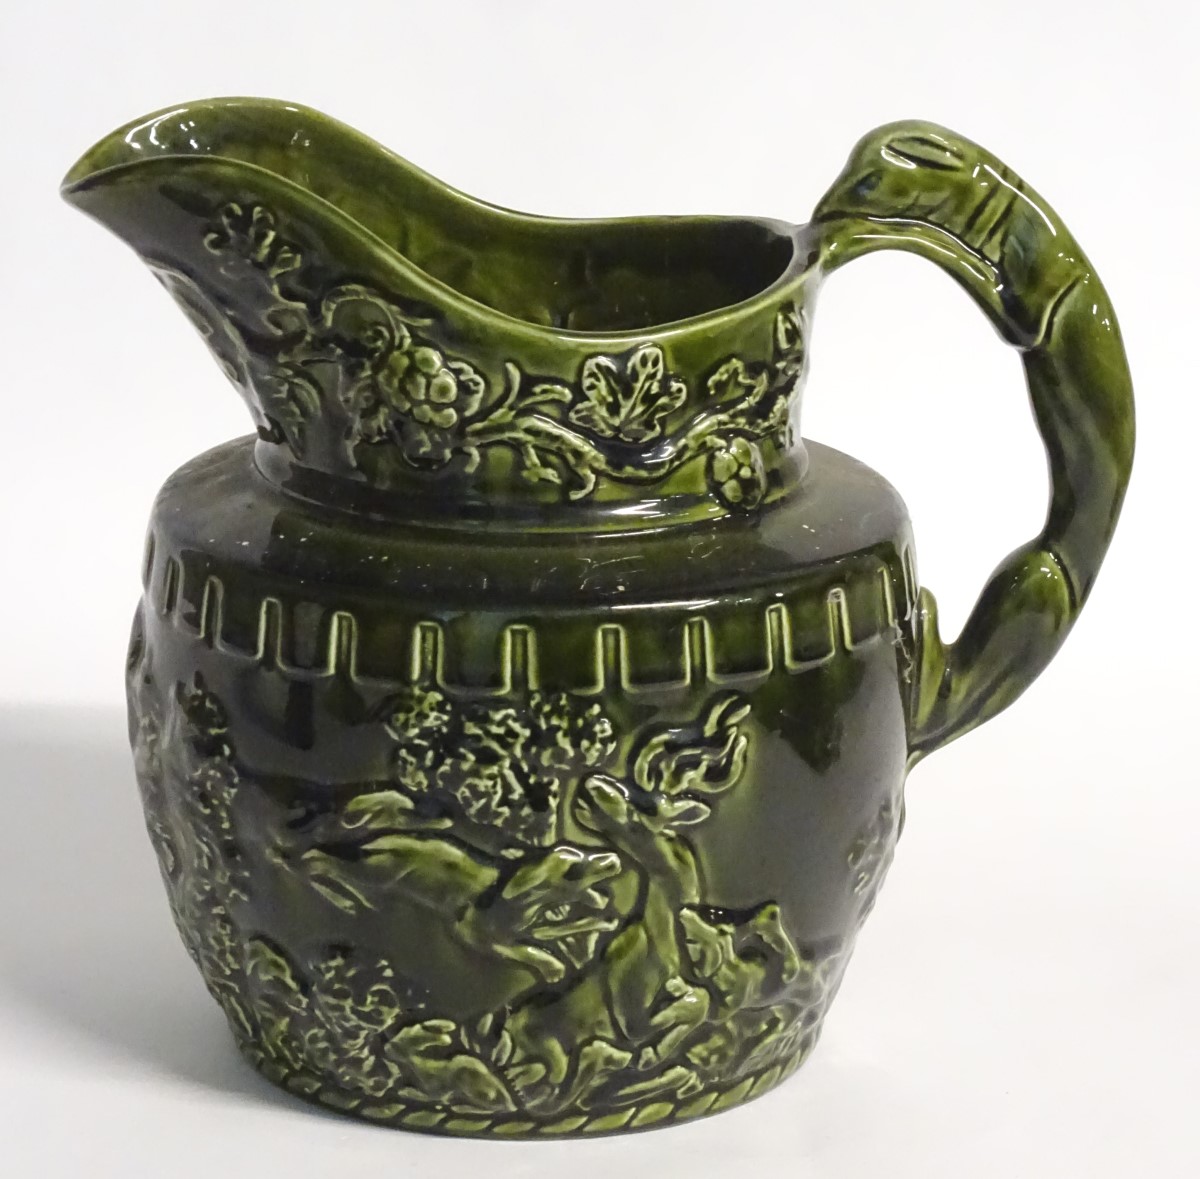 A 20thC Arthur Wood jug / pitcher, decorated with moulded hunting scenes and scrolling foliage, - Image 5 of 8